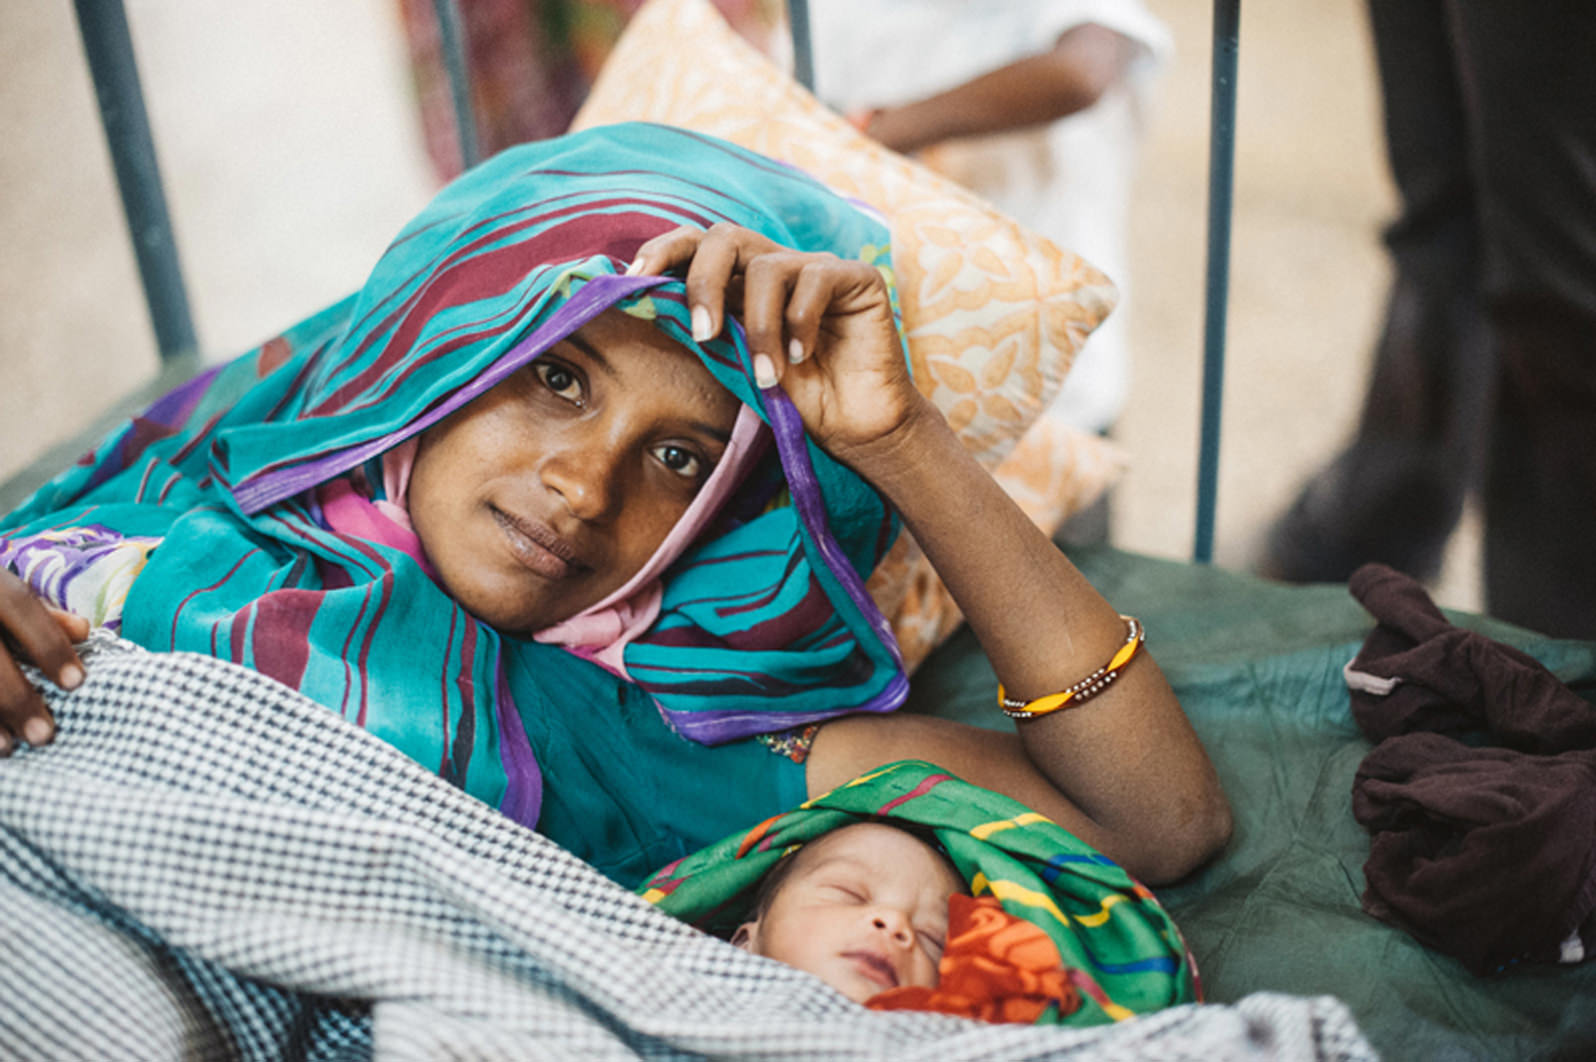 Making India a safer country for child birth